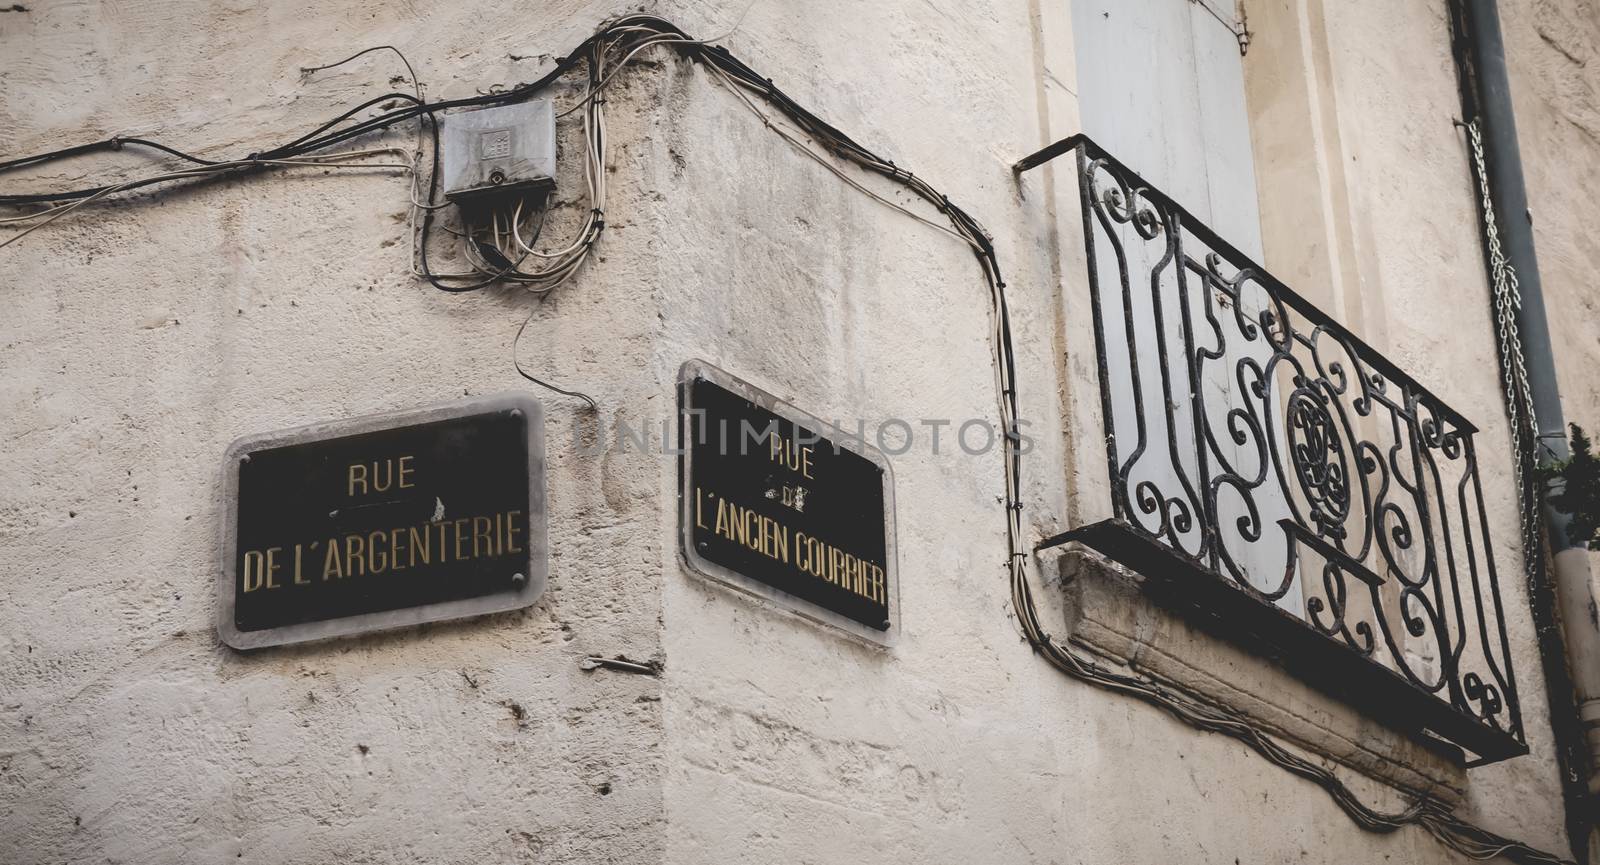 Street name plate in French - Rue de Argenterie and Rue de Ancie by AtlanticEUROSTOXX